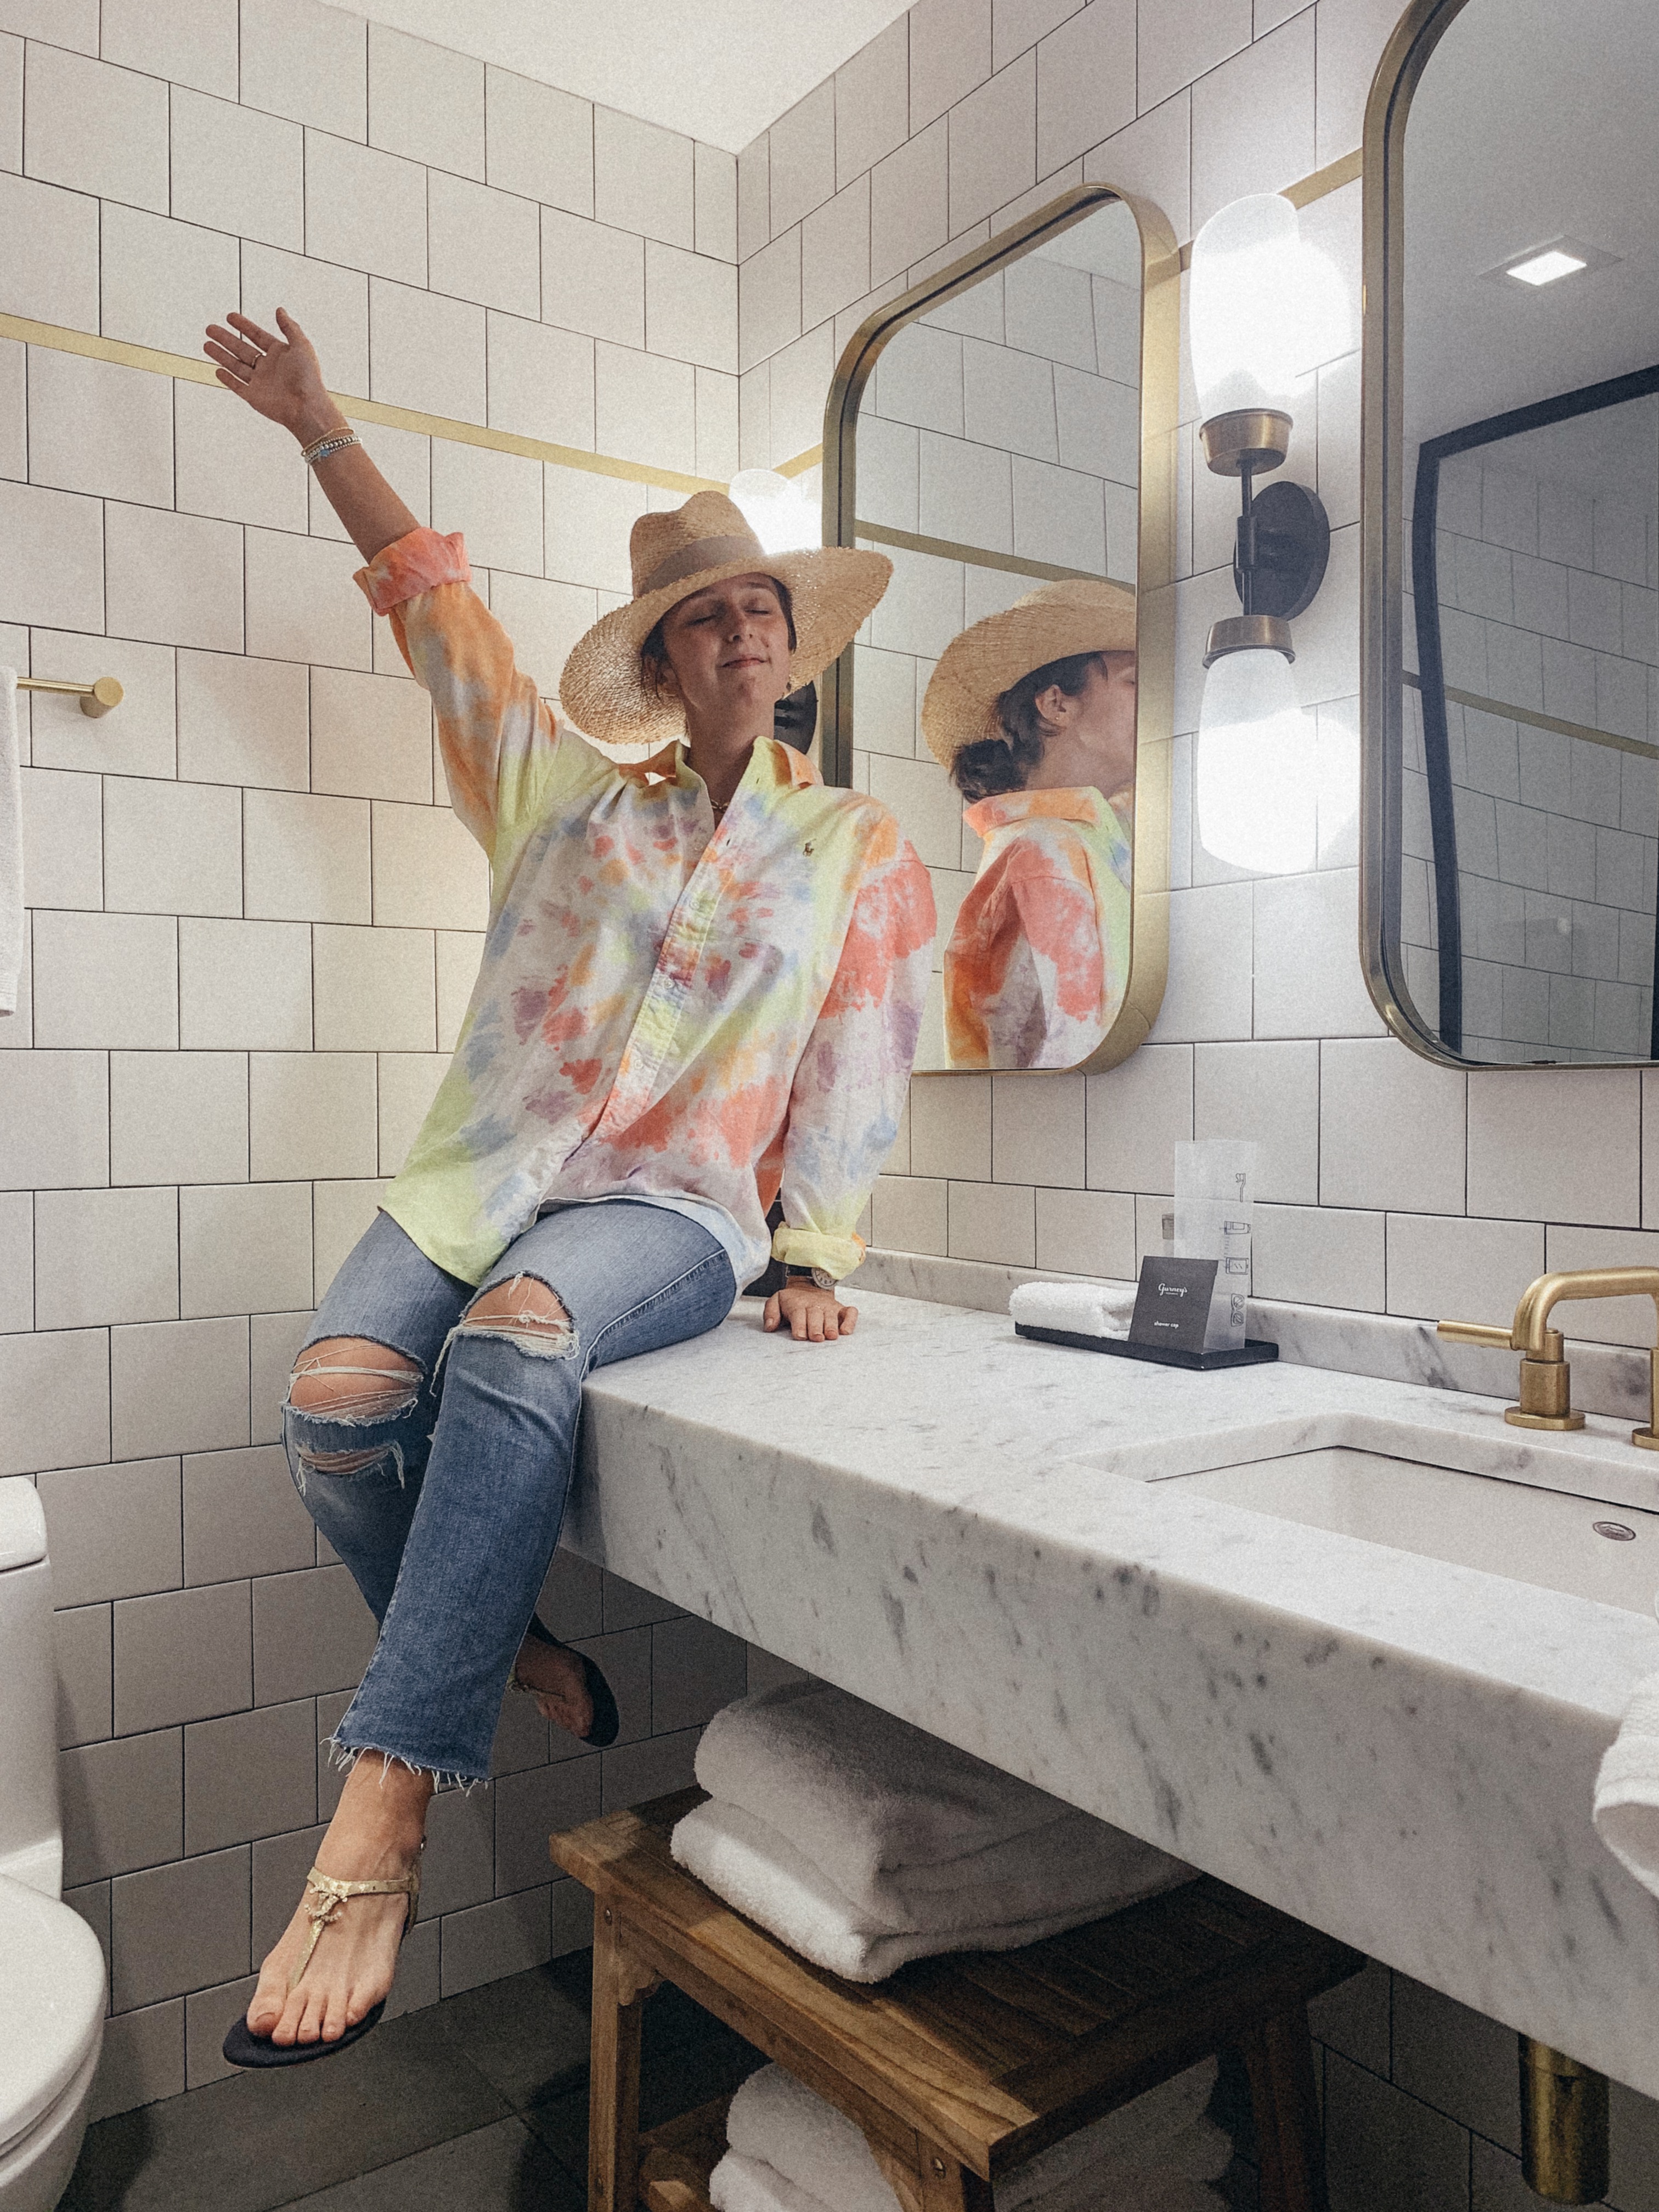 Gone to Gurney's Montauk Resort & Seawater Spa - Should you go?- Blogger-Hotel-Review-Gurneys-Hotel #travel #gurneys #montauk #summer #beach #casualstyle #outfit #summeroutfit #dvf